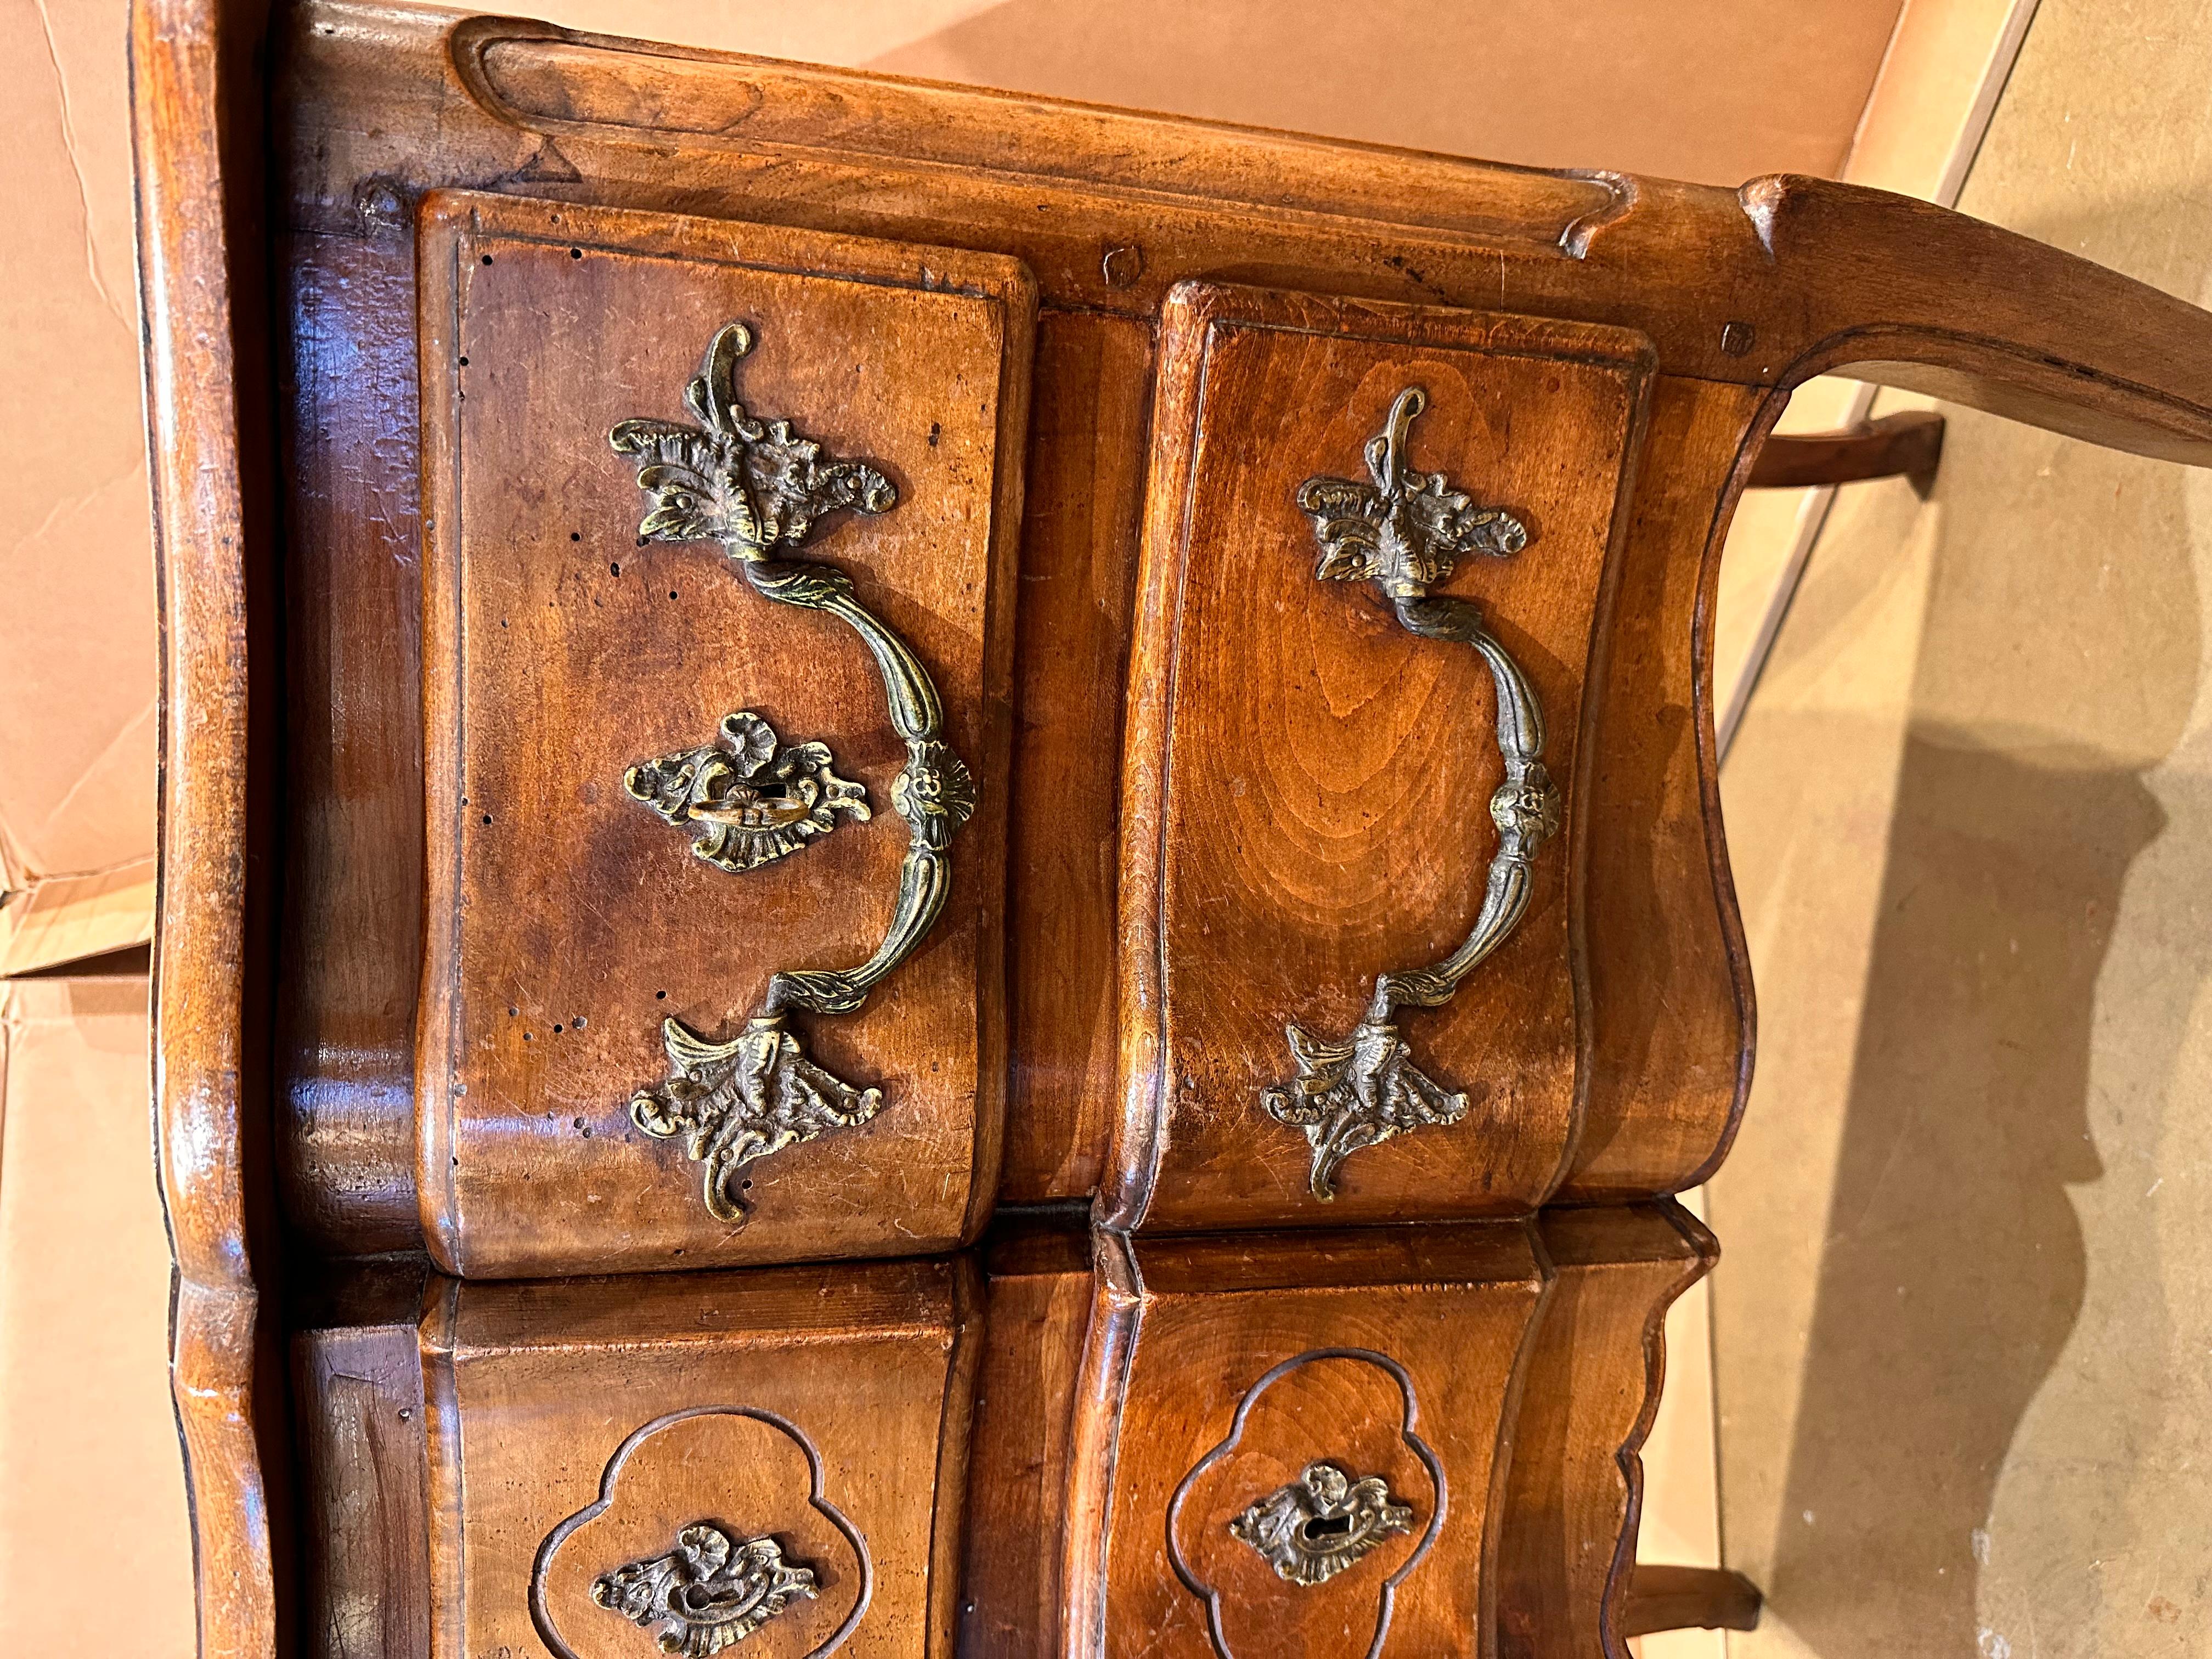 This is such a beautiful little French chest! For a small piece this chest carries itself well. It has a lovely patina that shows up the natural detail of the wood. The front shows the marks of excellent craftsmanship with a curved front that